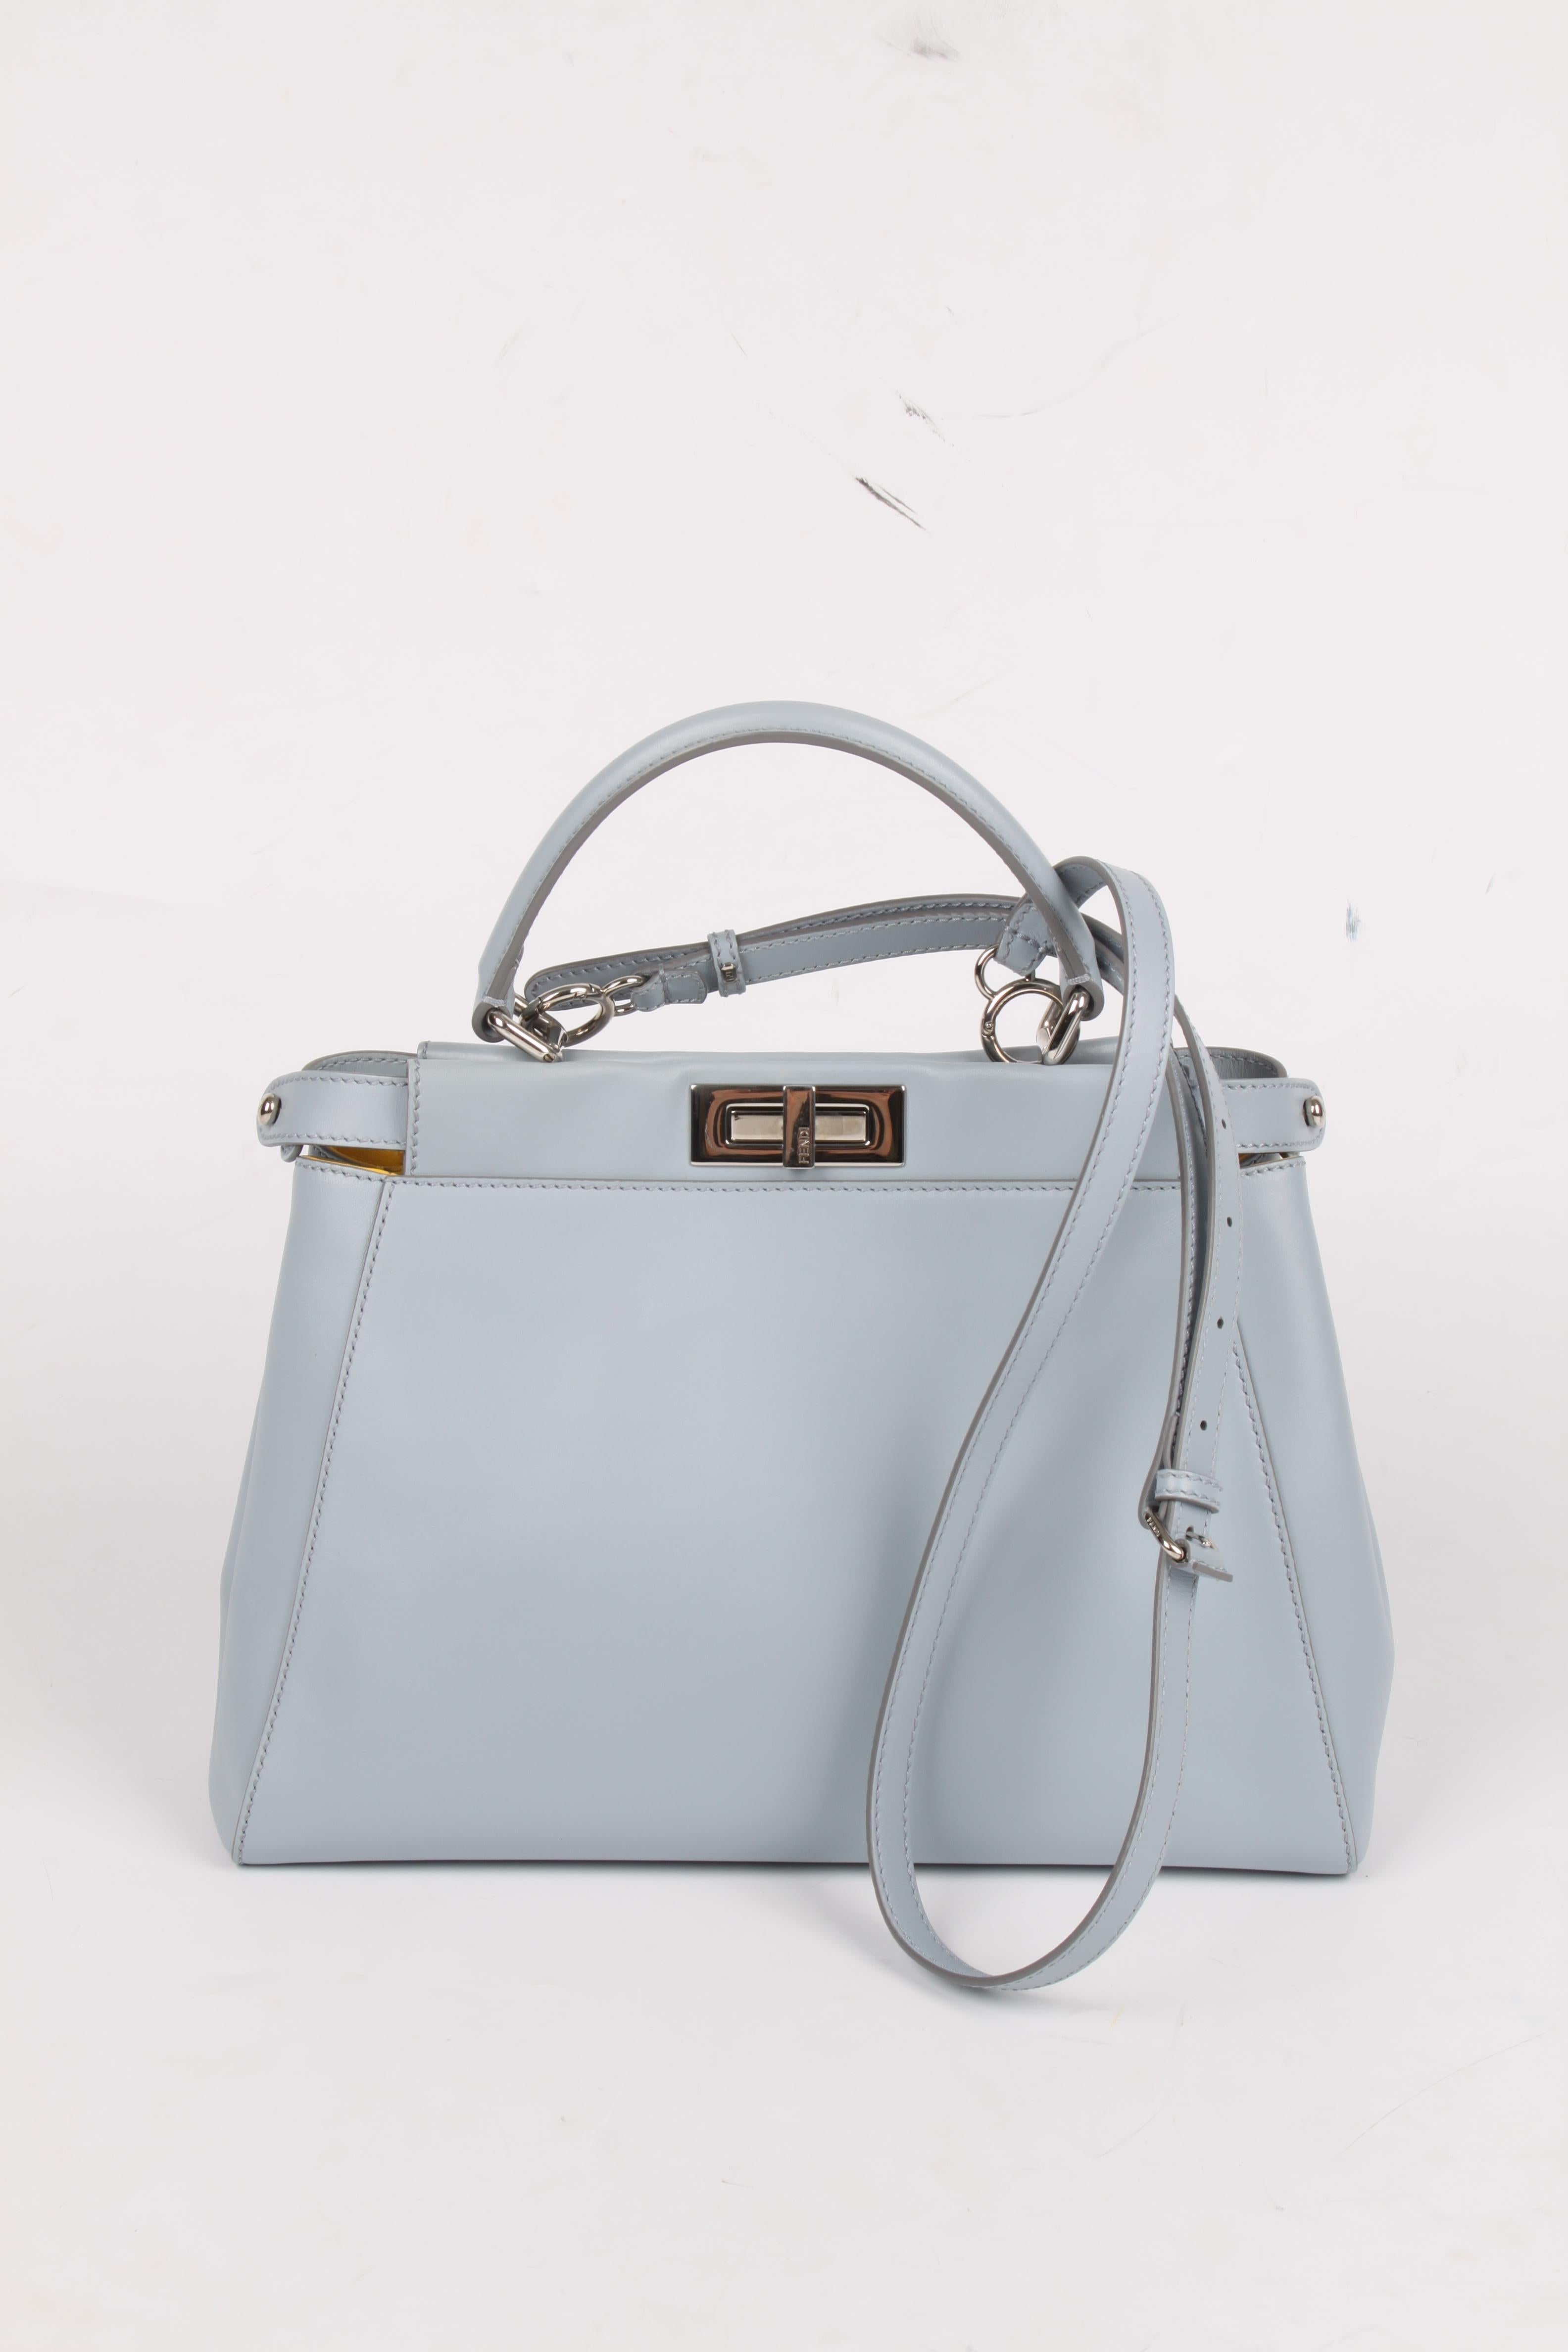 This is the Fendi Peekaboo Bag Medium, a really nice and iconic piece!

Introduced in 2009, but now again a very very popular bag. Very manageable size and practical due to the two large compartments that can each be locked with their own twist lock